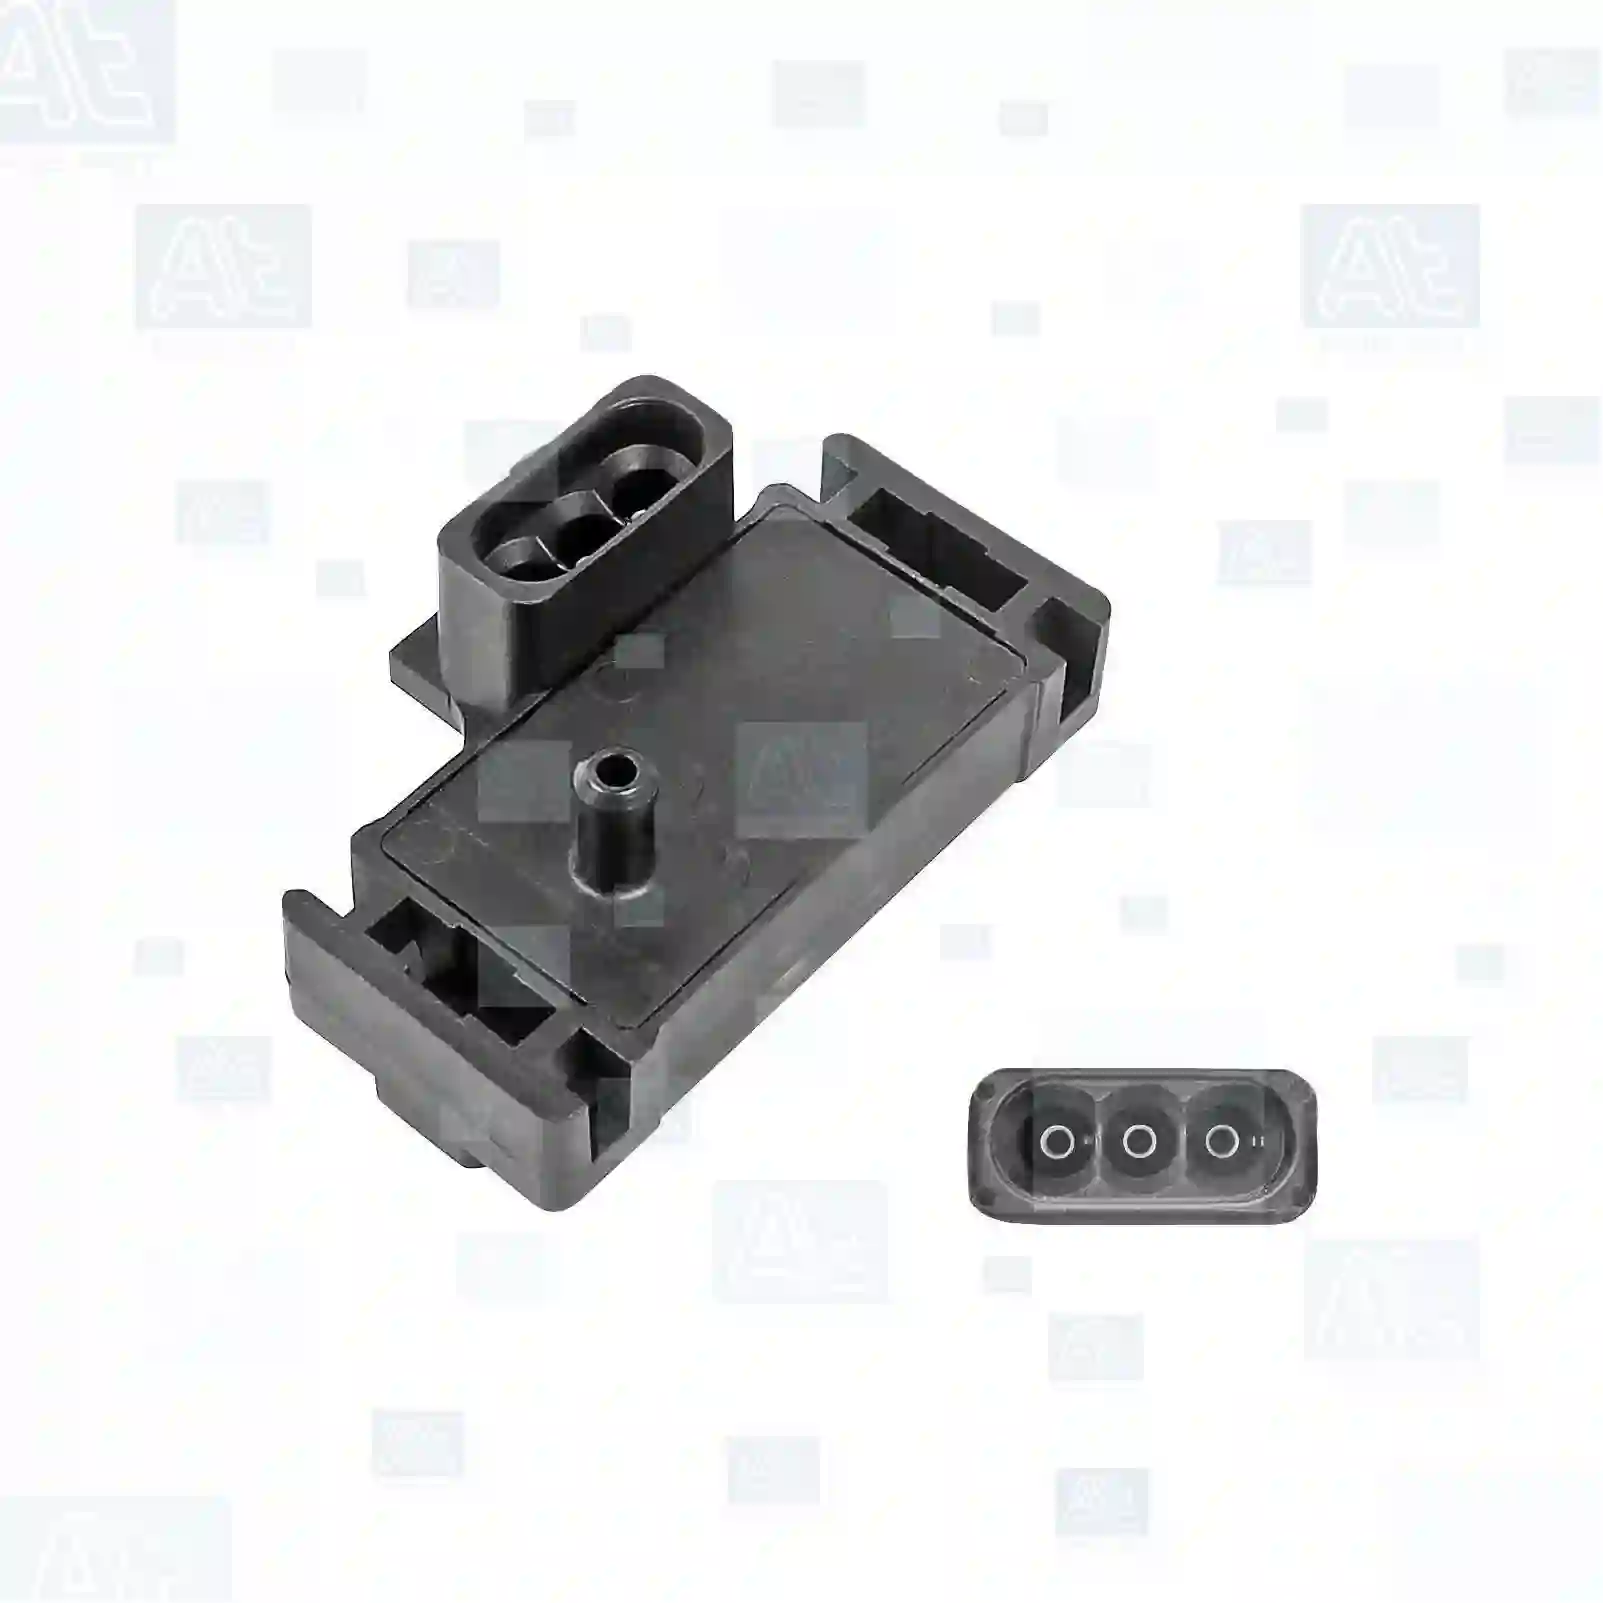 Vacuum sensor, intake manifold, 77710792, 05992408, 07696064, 60811534, 12569240, 16017460, 16137039, 16158055, 16254719, 17112715, 21020103, 95047198, 33000153, 33000273, 5234313, 8933000153, 8933000273, 19204S, 1920FC, 564609, 594607, 594609, 16137039, 95047198, 05992408, 07696064, 60811534, 1144809, 1C1Y-9F479-AA, 1238788, 12569240, 12589240, 16017460, 16137039, 16158055, 16254719, 17112715, 21020103, 6238927, 9389131, 16017460, 16137039, 8161370390, 39330-24750, 39333-22032, 8-16017460-0, 8-16137039-0, 8-16158055-0, 33000153, 33000273, 5234313, 8933000153, 0K950-18211, 05992408, 07696064, 60811534, 0235454532, 1238788, 6238927, 857701, 19204S, 1920FC, 564609, 594607, 594609, 7700706876, 8933000153, 8933000273, 1378162, 31303211, 3411400 ||  77710792 At Spare Part | Engine, Accelerator Pedal, Camshaft, Connecting Rod, Crankcase, Crankshaft, Cylinder Head, Engine Suspension Mountings, Exhaust Manifold, Exhaust Gas Recirculation, Filter Kits, Flywheel Housing, General Overhaul Kits, Engine, Intake Manifold, Oil Cleaner, Oil Cooler, Oil Filter, Oil Pump, Oil Sump, Piston & Liner, Sensor & Switch, Timing Case, Turbocharger, Cooling System, Belt Tensioner, Coolant Filter, Coolant Pipe, Corrosion Prevention Agent, Drive, Expansion Tank, Fan, Intercooler, Monitors & Gauges, Radiator, Thermostat, V-Belt / Timing belt, Water Pump, Fuel System, Electronical Injector Unit, Feed Pump, Fuel Filter, cpl., Fuel Gauge Sender,  Fuel Line, Fuel Pump, Fuel Tank, Injection Line Kit, Injection Pump, Exhaust System, Clutch & Pedal, Gearbox, Propeller Shaft, Axles, Brake System, Hubs & Wheels, Suspension, Leaf Spring, Universal Parts / Accessories, Steering, Electrical System, Cabin Vacuum sensor, intake manifold, 77710792, 05992408, 07696064, 60811534, 12569240, 16017460, 16137039, 16158055, 16254719, 17112715, 21020103, 95047198, 33000153, 33000273, 5234313, 8933000153, 8933000273, 19204S, 1920FC, 564609, 594607, 594609, 16137039, 95047198, 05992408, 07696064, 60811534, 1144809, 1C1Y-9F479-AA, 1238788, 12569240, 12589240, 16017460, 16137039, 16158055, 16254719, 17112715, 21020103, 6238927, 9389131, 16017460, 16137039, 8161370390, 39330-24750, 39333-22032, 8-16017460-0, 8-16137039-0, 8-16158055-0, 33000153, 33000273, 5234313, 8933000153, 0K950-18211, 05992408, 07696064, 60811534, 0235454532, 1238788, 6238927, 857701, 19204S, 1920FC, 564609, 594607, 594609, 7700706876, 8933000153, 8933000273, 1378162, 31303211, 3411400 ||  77710792 At Spare Part | Engine, Accelerator Pedal, Camshaft, Connecting Rod, Crankcase, Crankshaft, Cylinder Head, Engine Suspension Mountings, Exhaust Manifold, Exhaust Gas Recirculation, Filter Kits, Flywheel Housing, General Overhaul Kits, Engine, Intake Manifold, Oil Cleaner, Oil Cooler, Oil Filter, Oil Pump, Oil Sump, Piston & Liner, Sensor & Switch, Timing Case, Turbocharger, Cooling System, Belt Tensioner, Coolant Filter, Coolant Pipe, Corrosion Prevention Agent, Drive, Expansion Tank, Fan, Intercooler, Monitors & Gauges, Radiator, Thermostat, V-Belt / Timing belt, Water Pump, Fuel System, Electronical Injector Unit, Feed Pump, Fuel Filter, cpl., Fuel Gauge Sender,  Fuel Line, Fuel Pump, Fuel Tank, Injection Line Kit, Injection Pump, Exhaust System, Clutch & Pedal, Gearbox, Propeller Shaft, Axles, Brake System, Hubs & Wheels, Suspension, Leaf Spring, Universal Parts / Accessories, Steering, Electrical System, Cabin